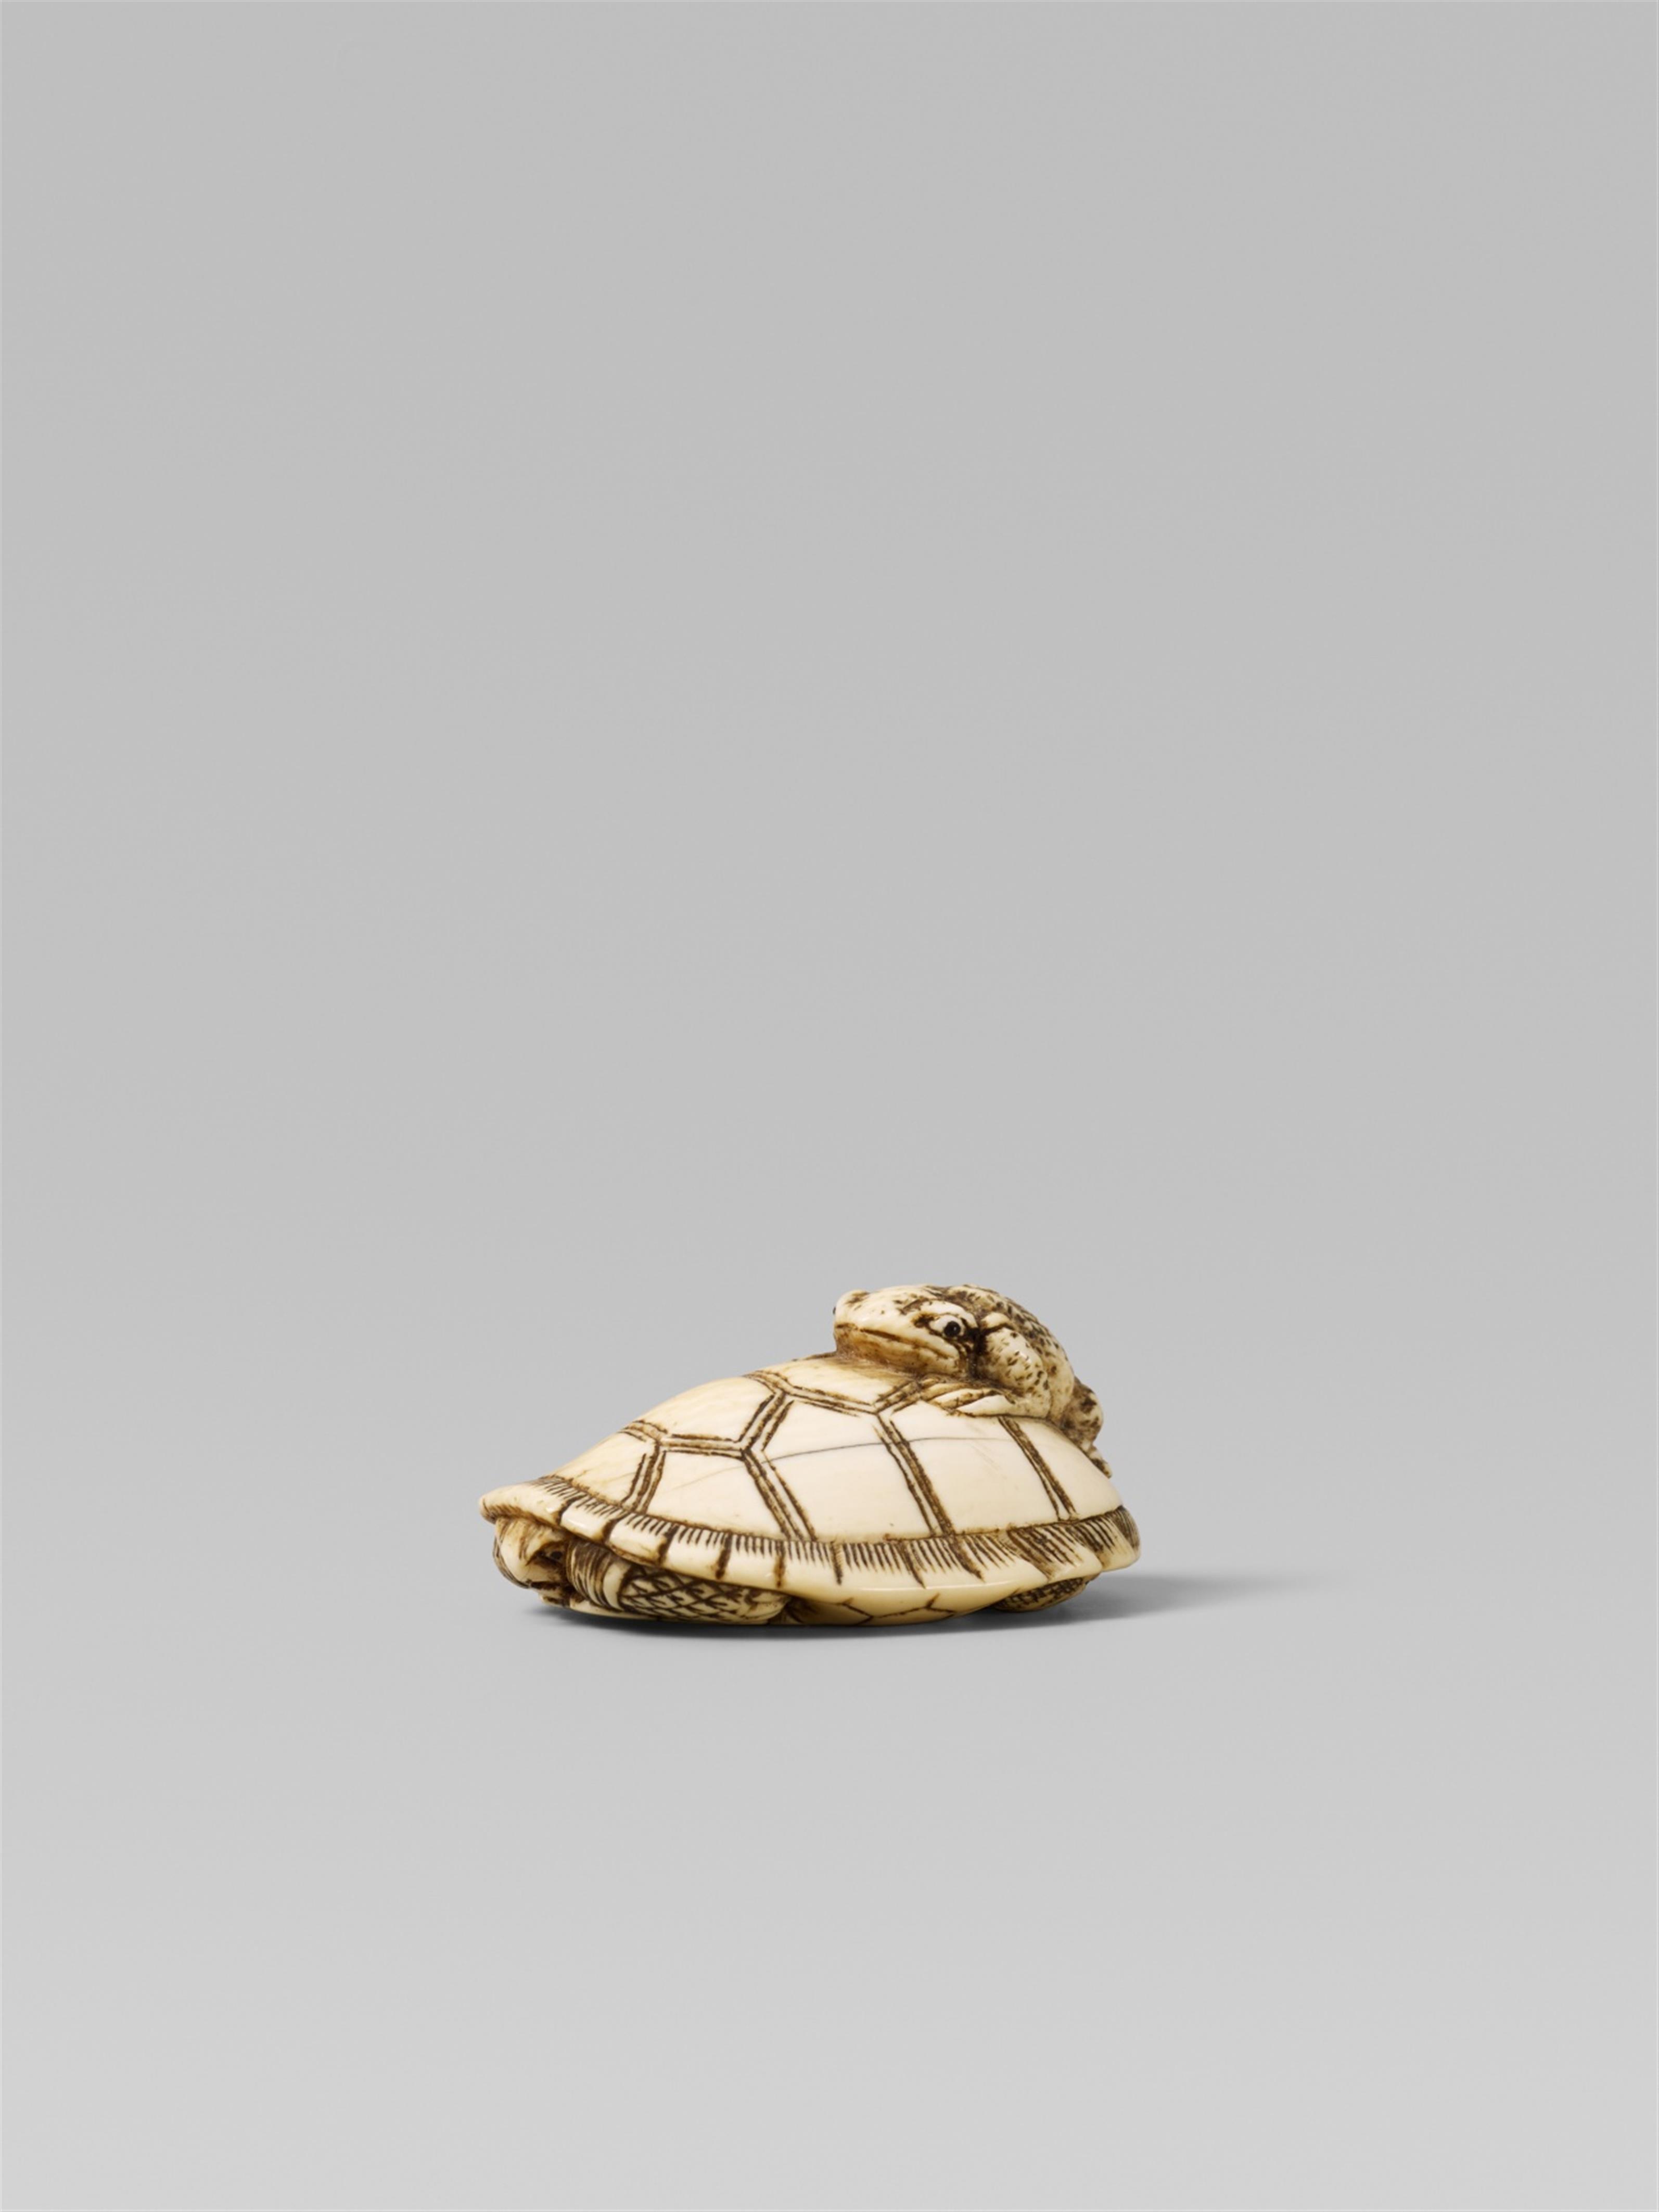 Two ivory netsuke of toads. Late 19th century - image-2